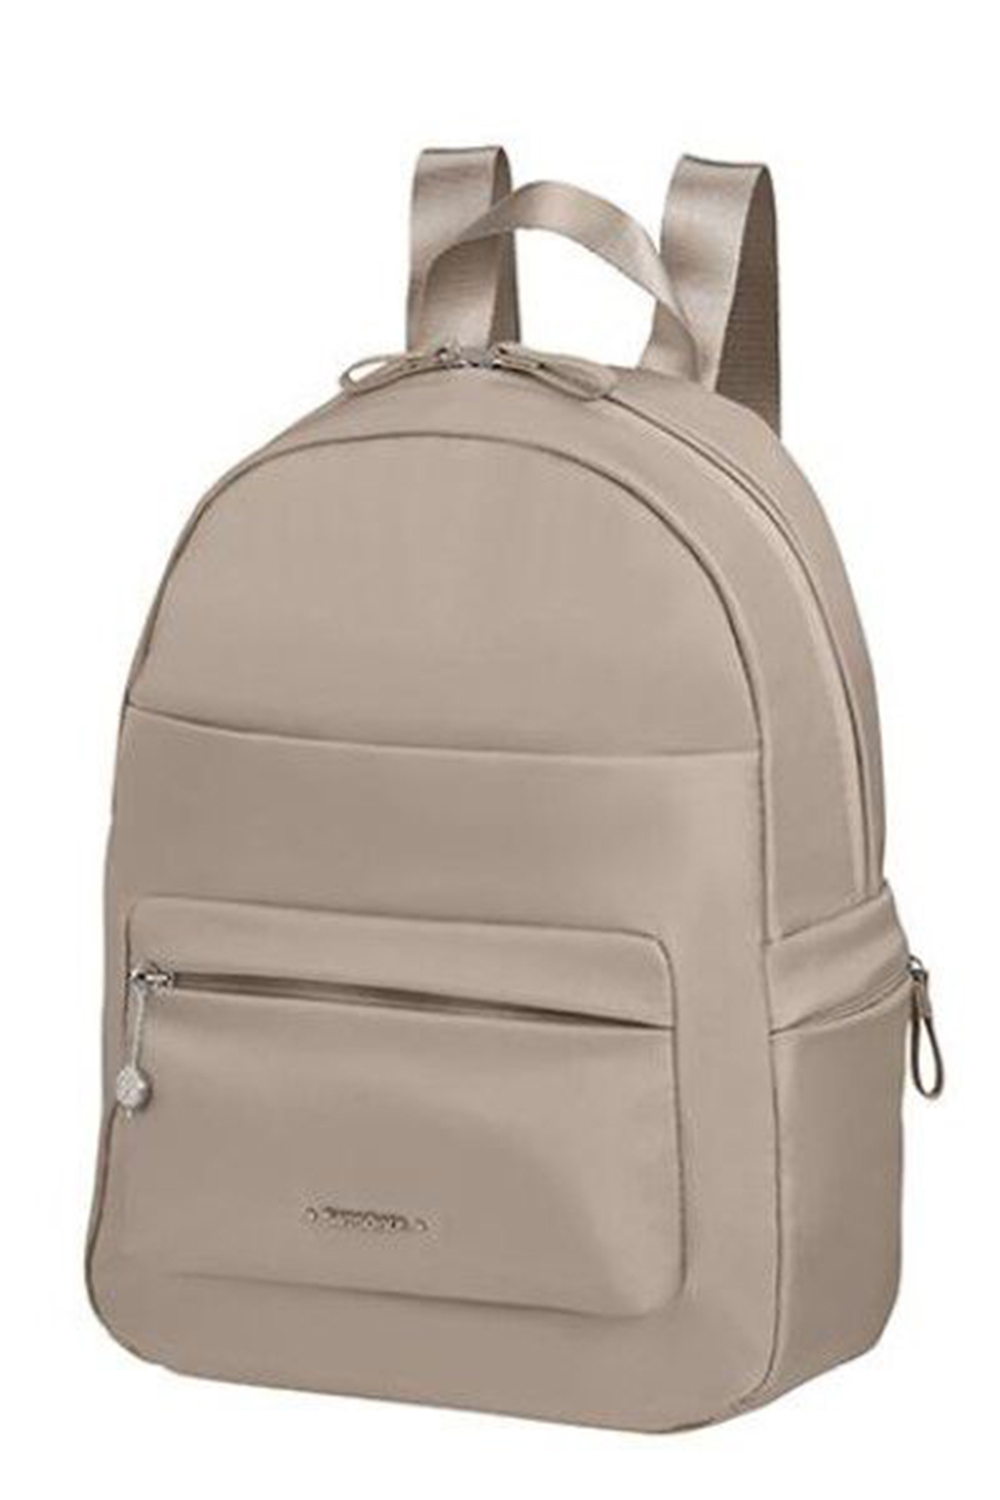 Samsonite Leather Backpack | Computer Bags & Cases | Electronics | Shop The  Exchange